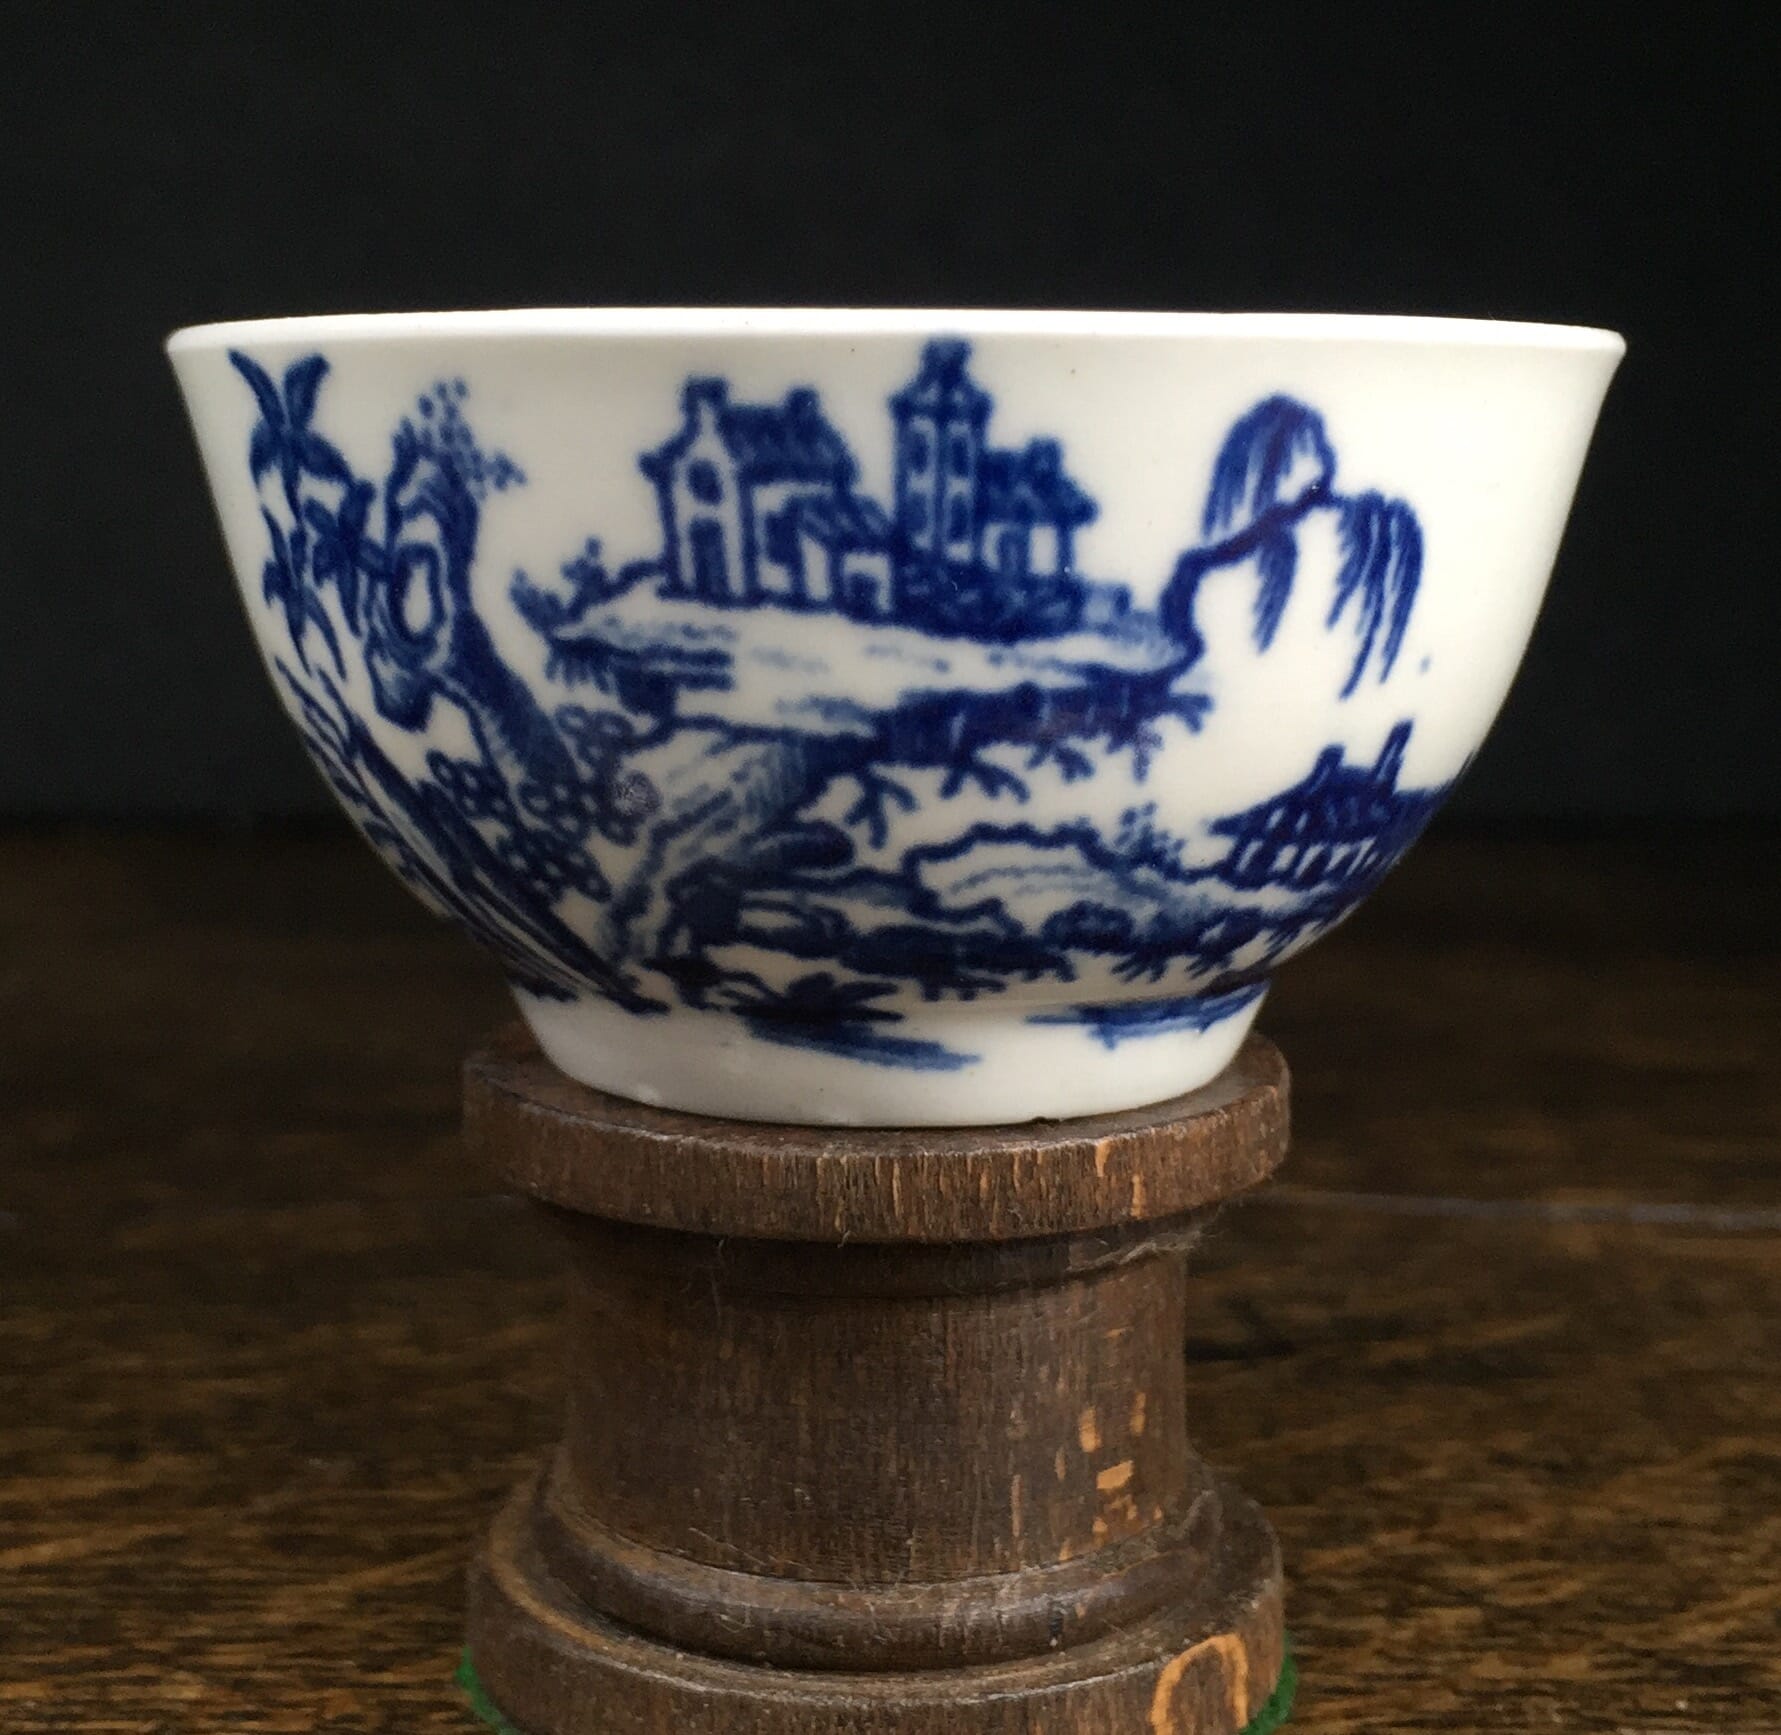 Very Rare Worcester teabowl, '2 Swan Precipice' printed pattern, c. 1757-60-0